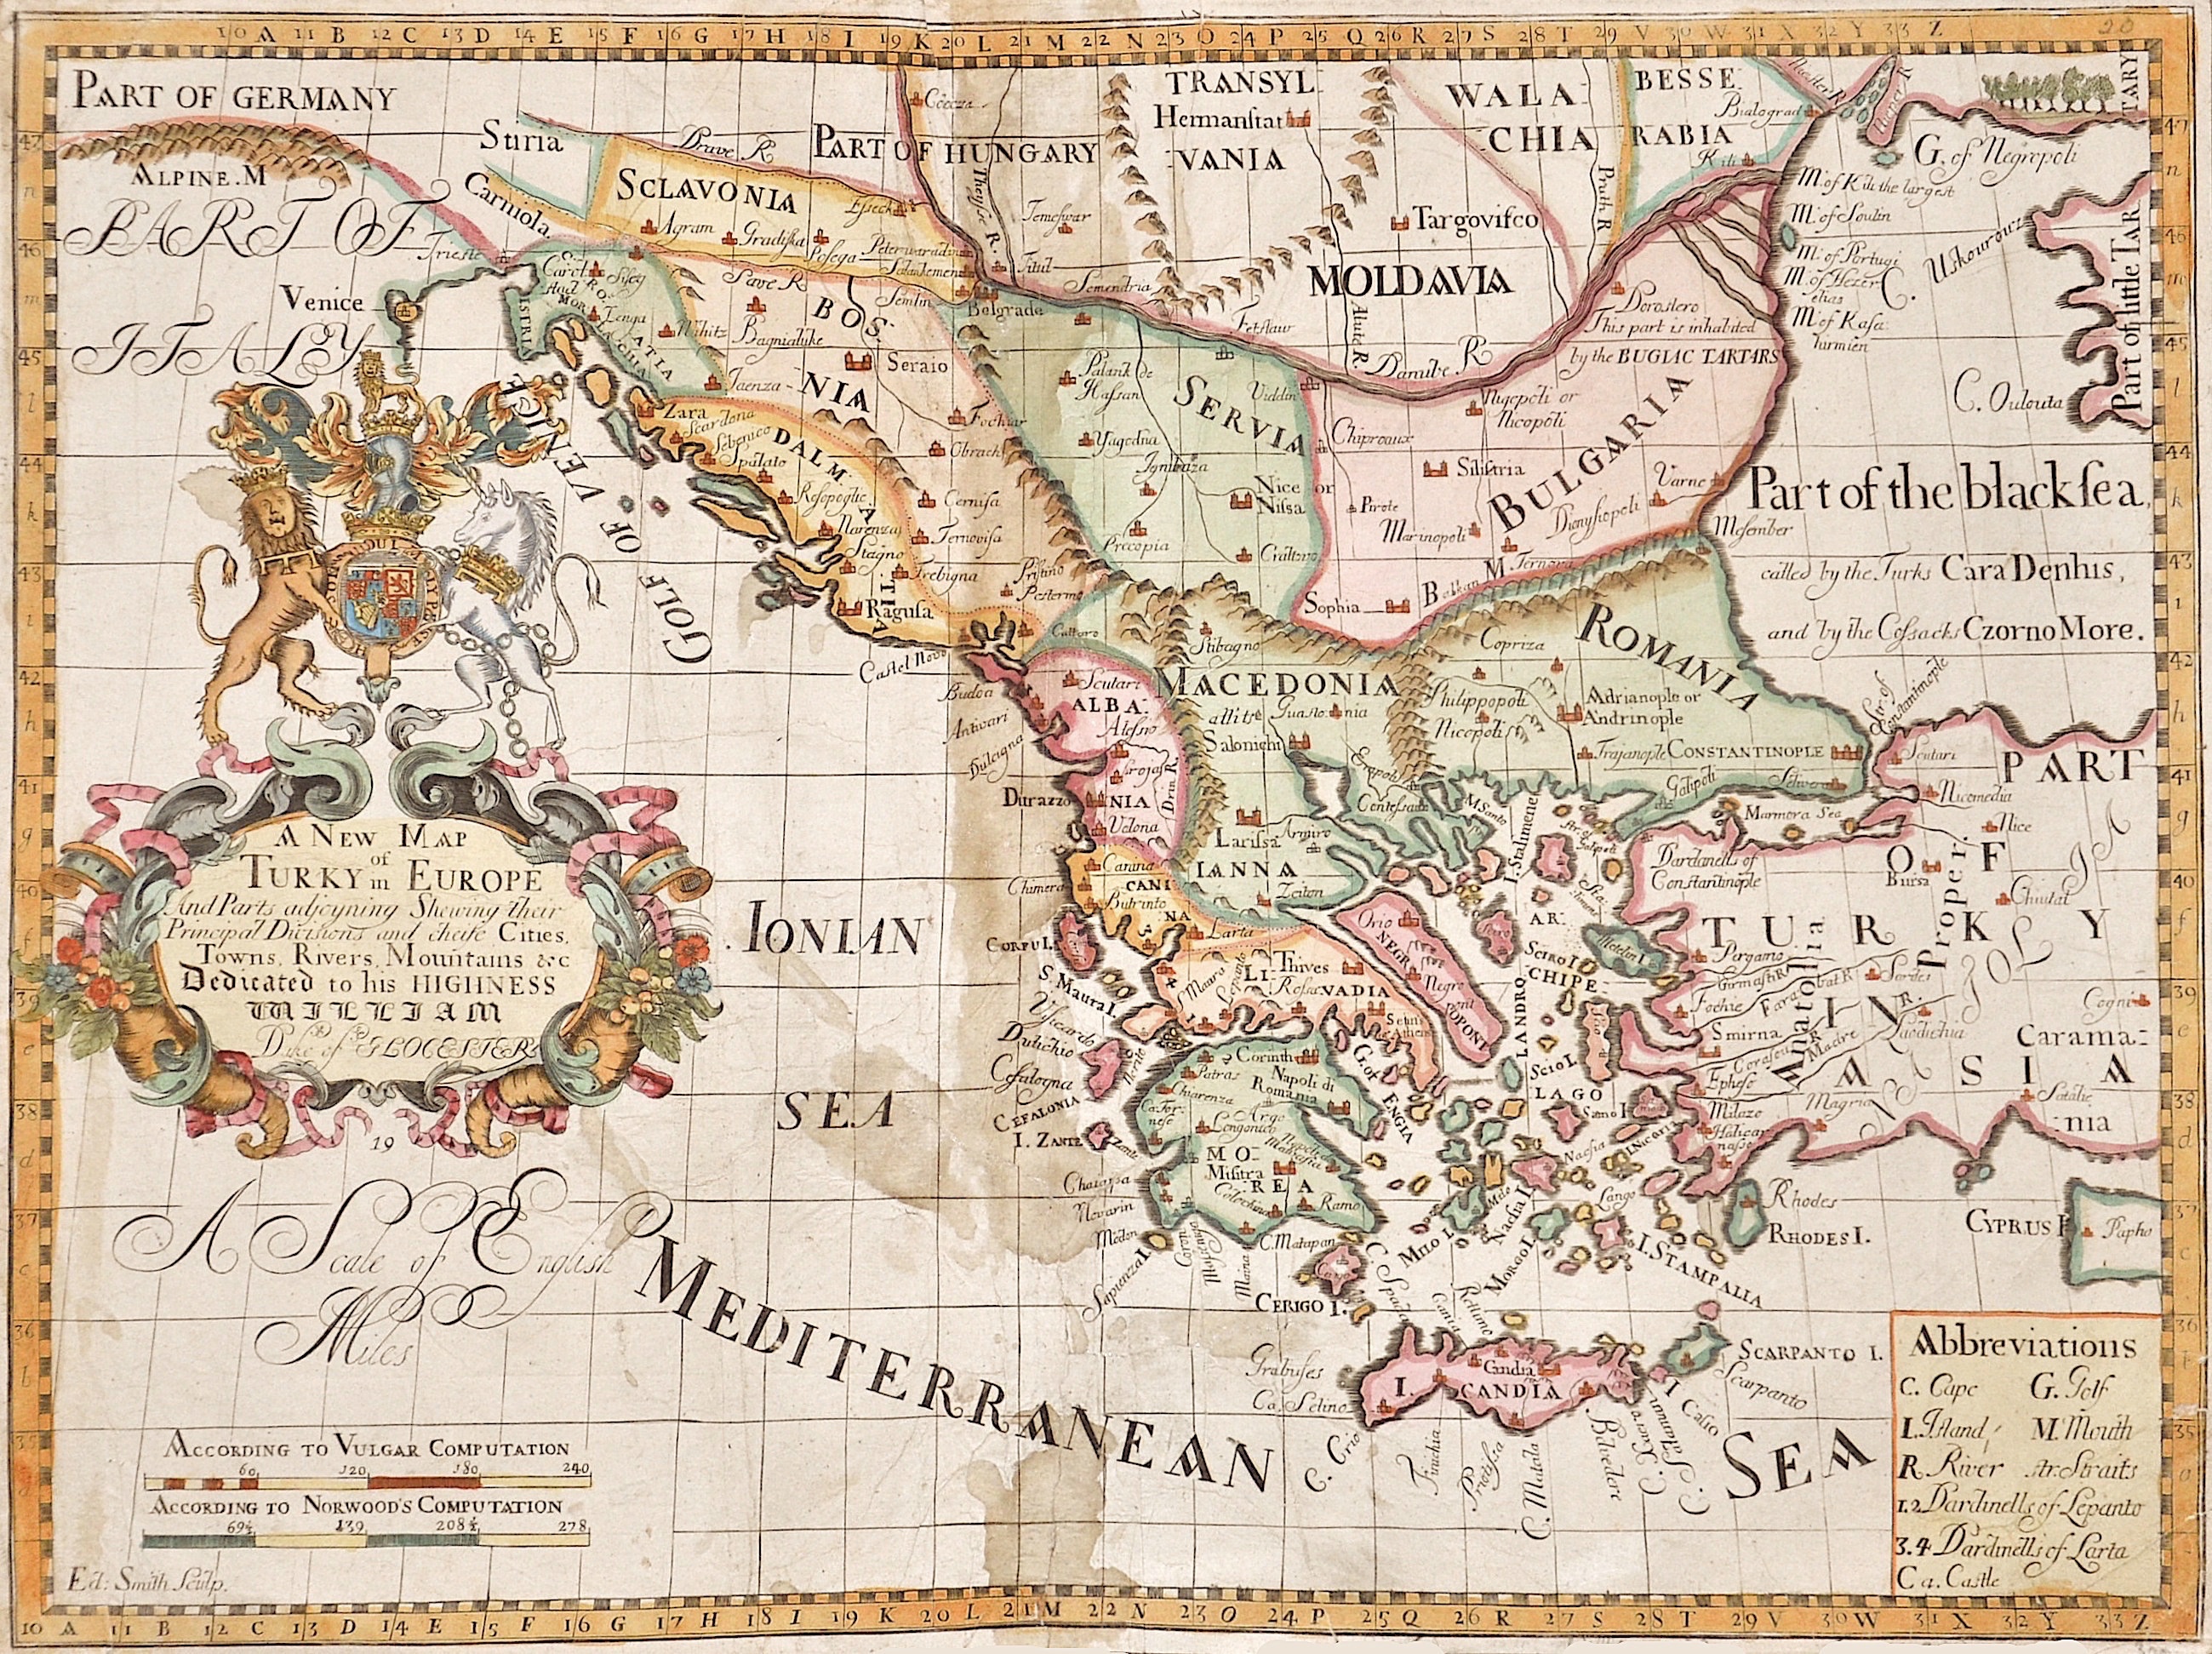 Wells  A New Map of Antient Greece, Thrace, Moesia, Illyricum, and the Isles adjoyning …